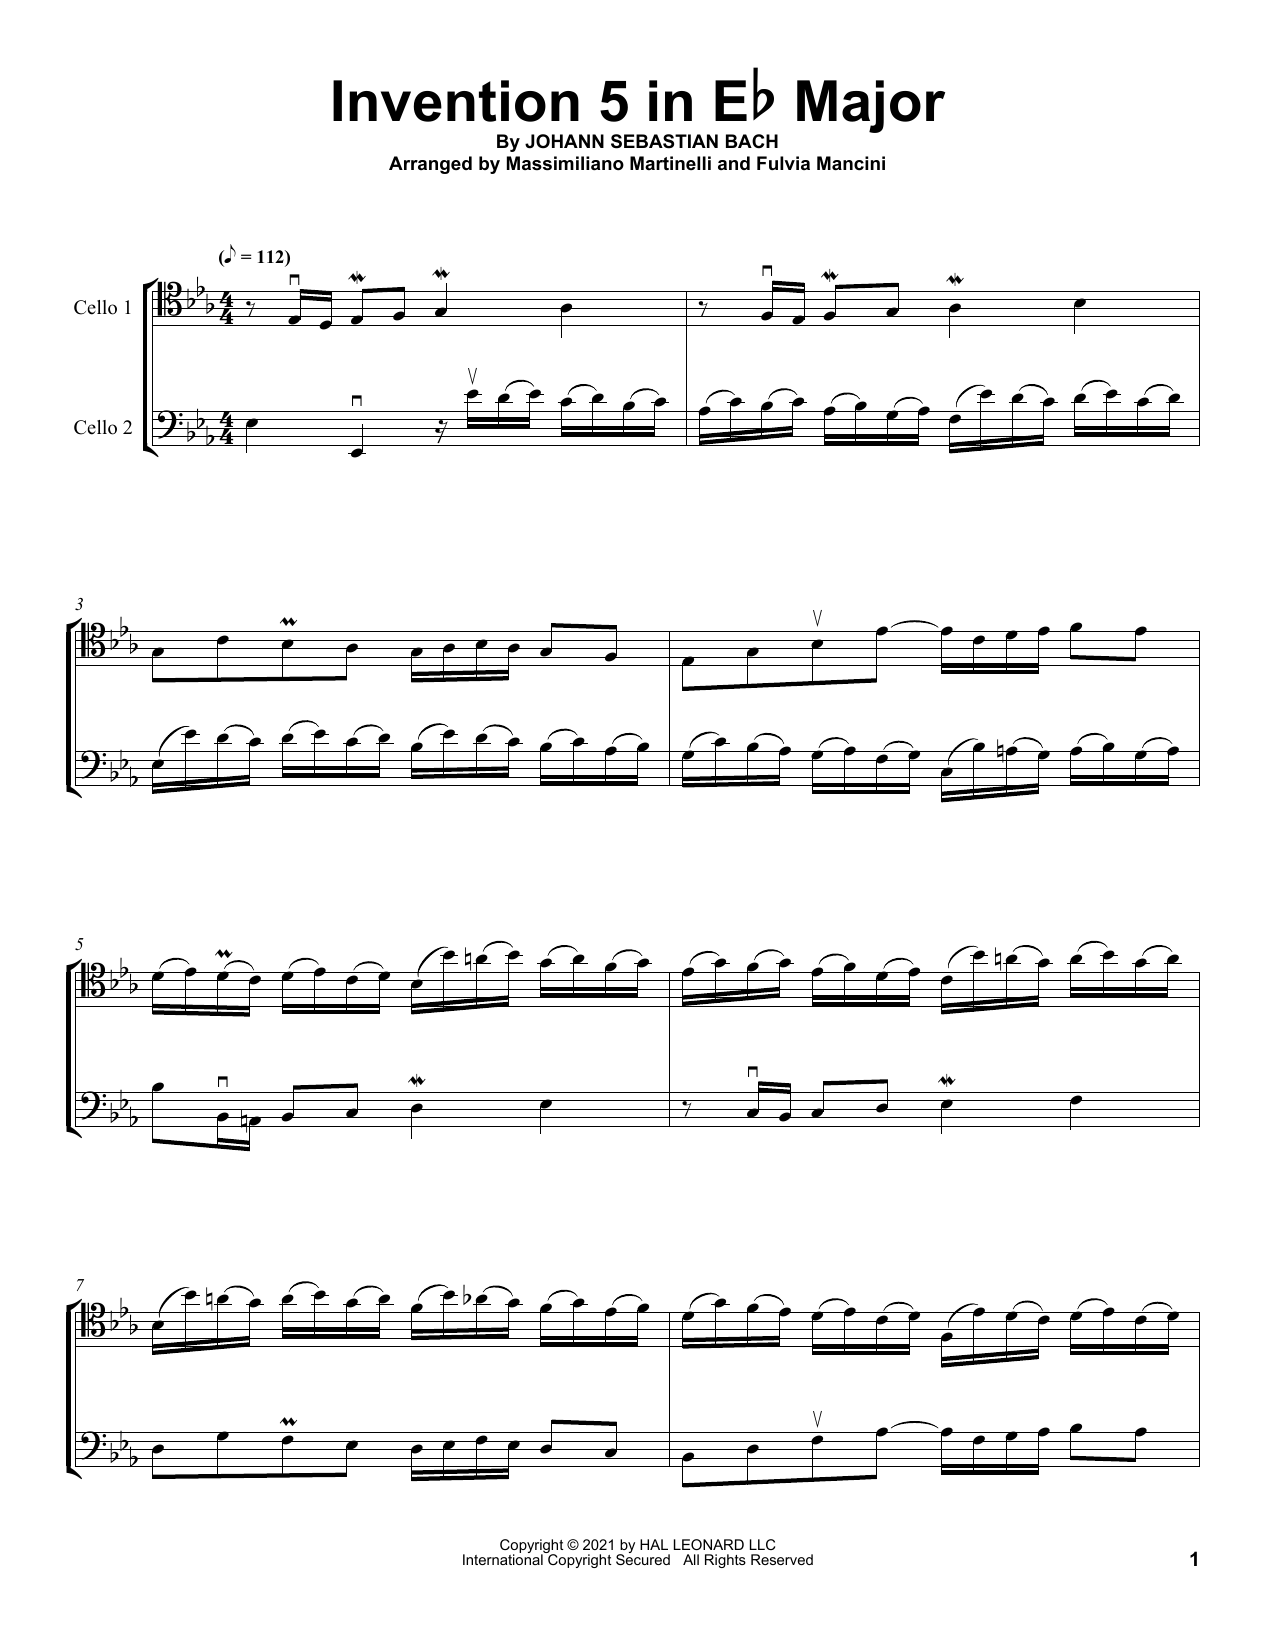 Download Mr & Mrs Cello Invention 5 In E-Flat Major Sheet Music